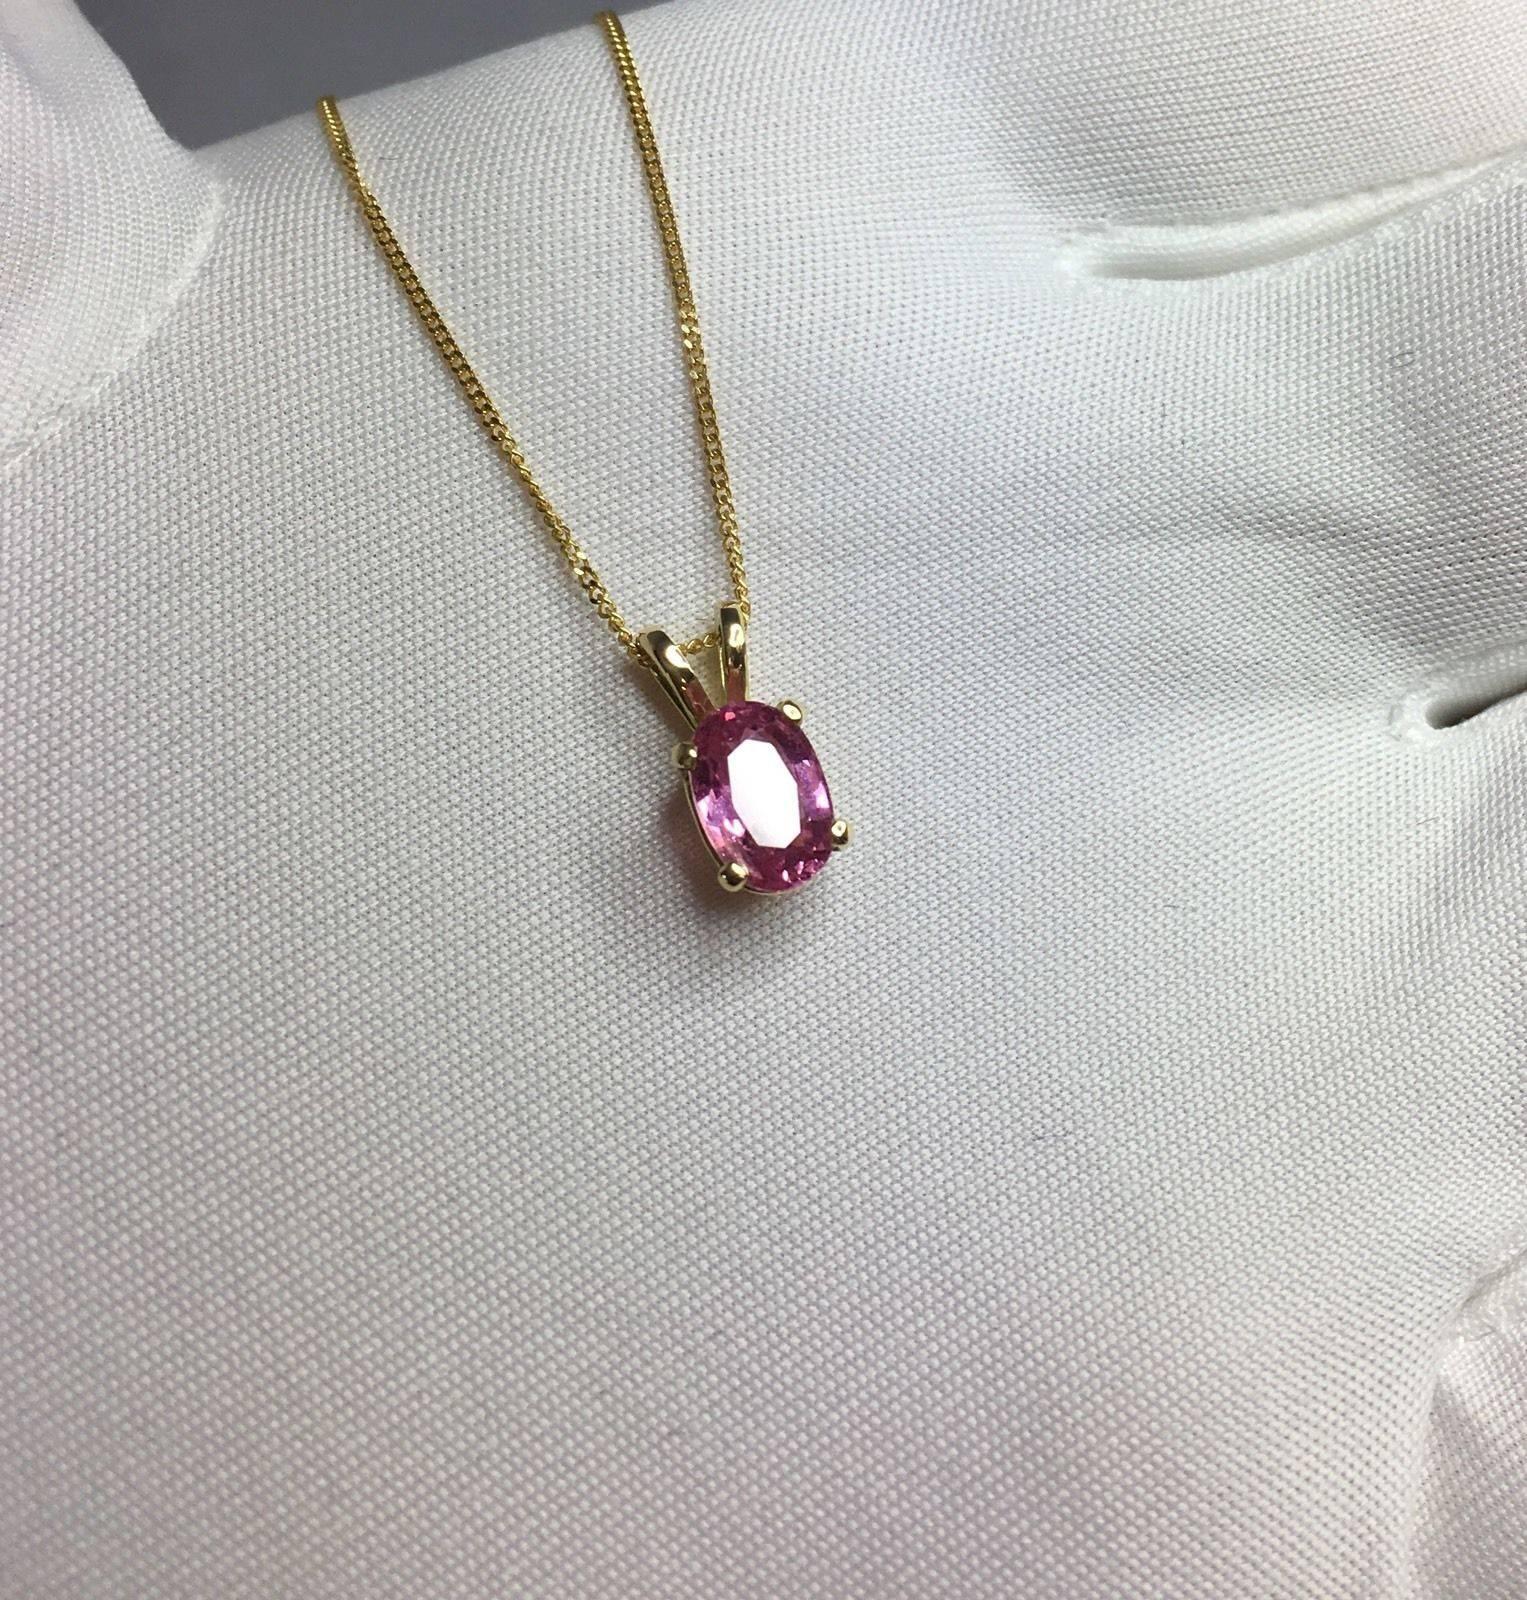 Natural vivid purple pink sapphire solitaire pendant.

Beautiful oval cut Ceylon Sapphire. Set in a fine 18k yellow gold pendant setting.


Untreated and unheated. Very rare for Sapphires. Particularly where colour is so vivid. 

1.09 carat stone